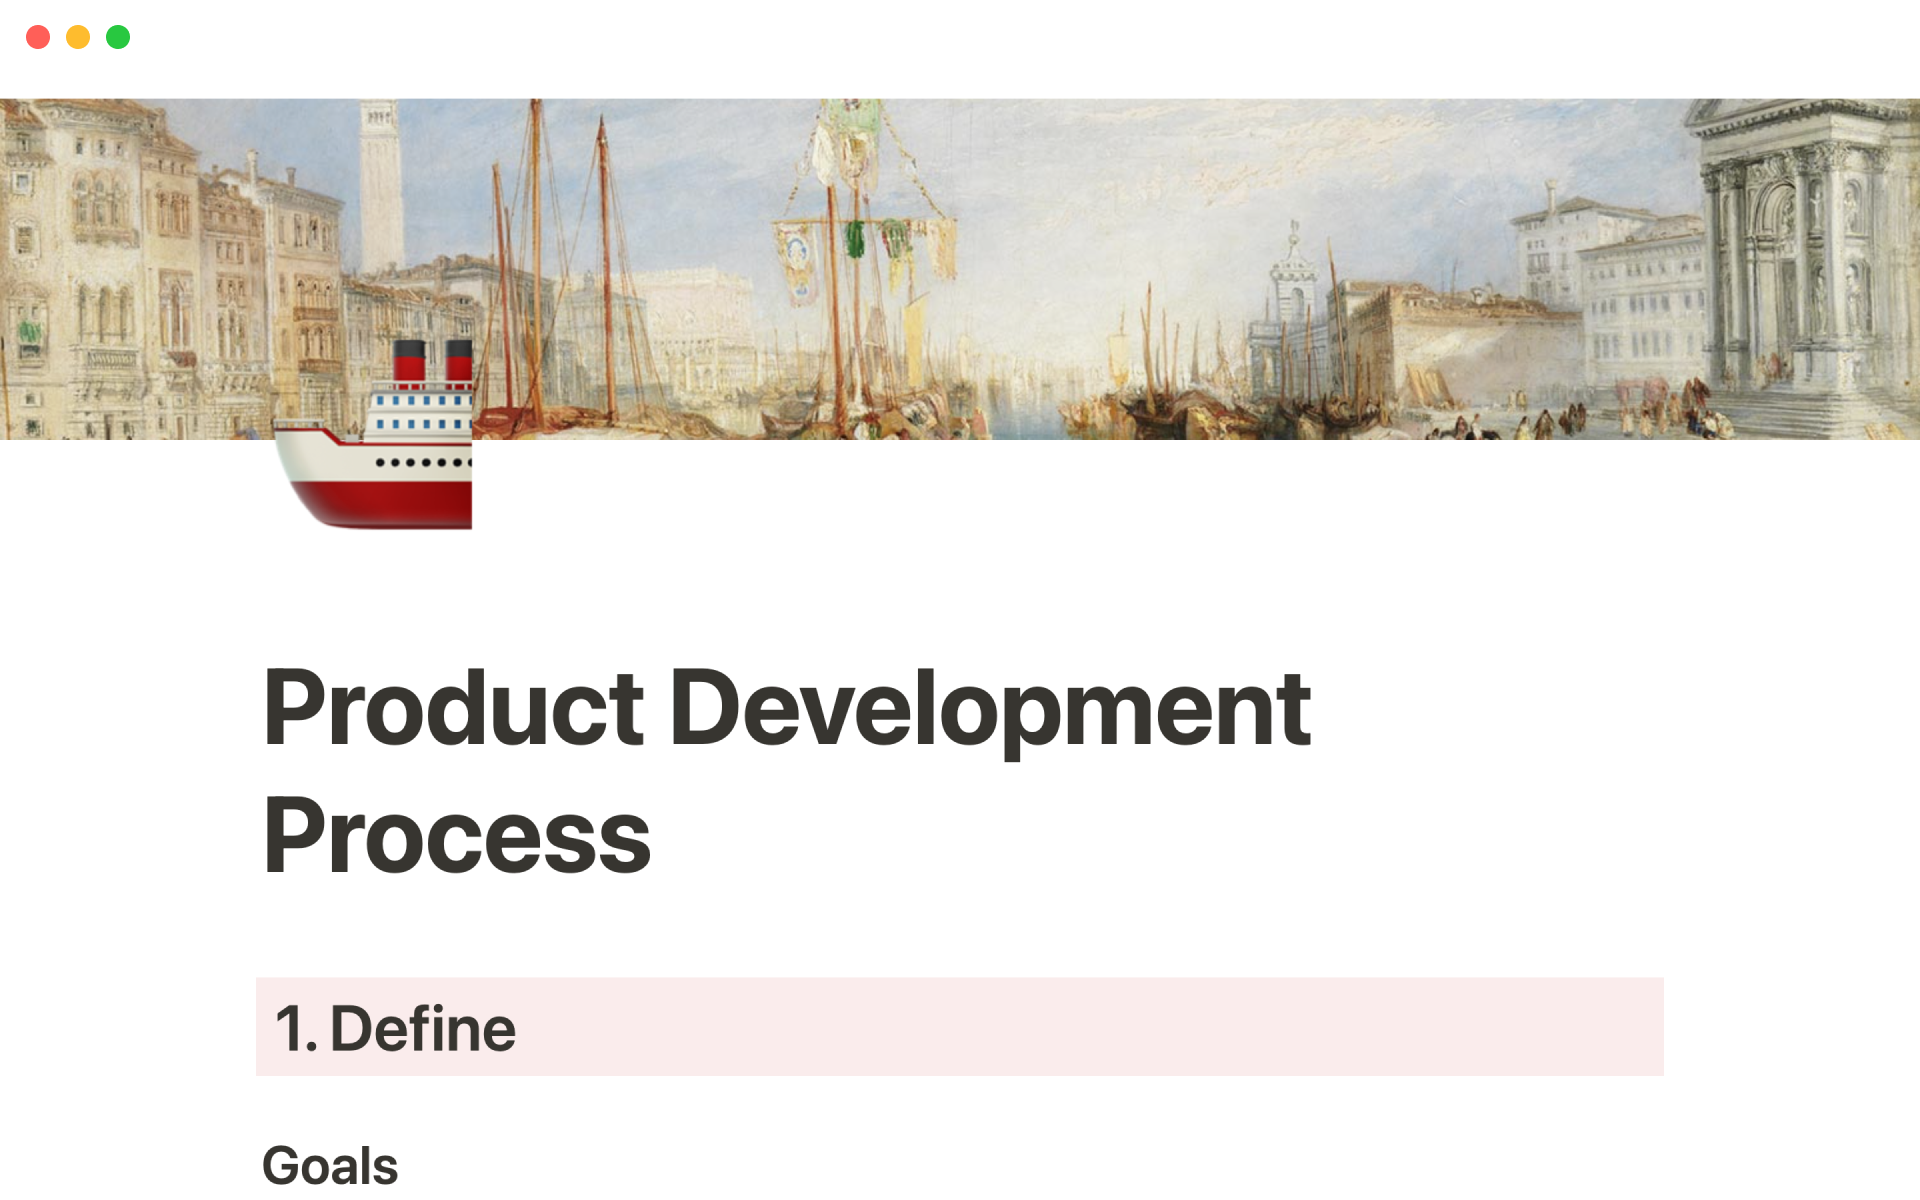 Product development milestones and recommended documentation for each step.